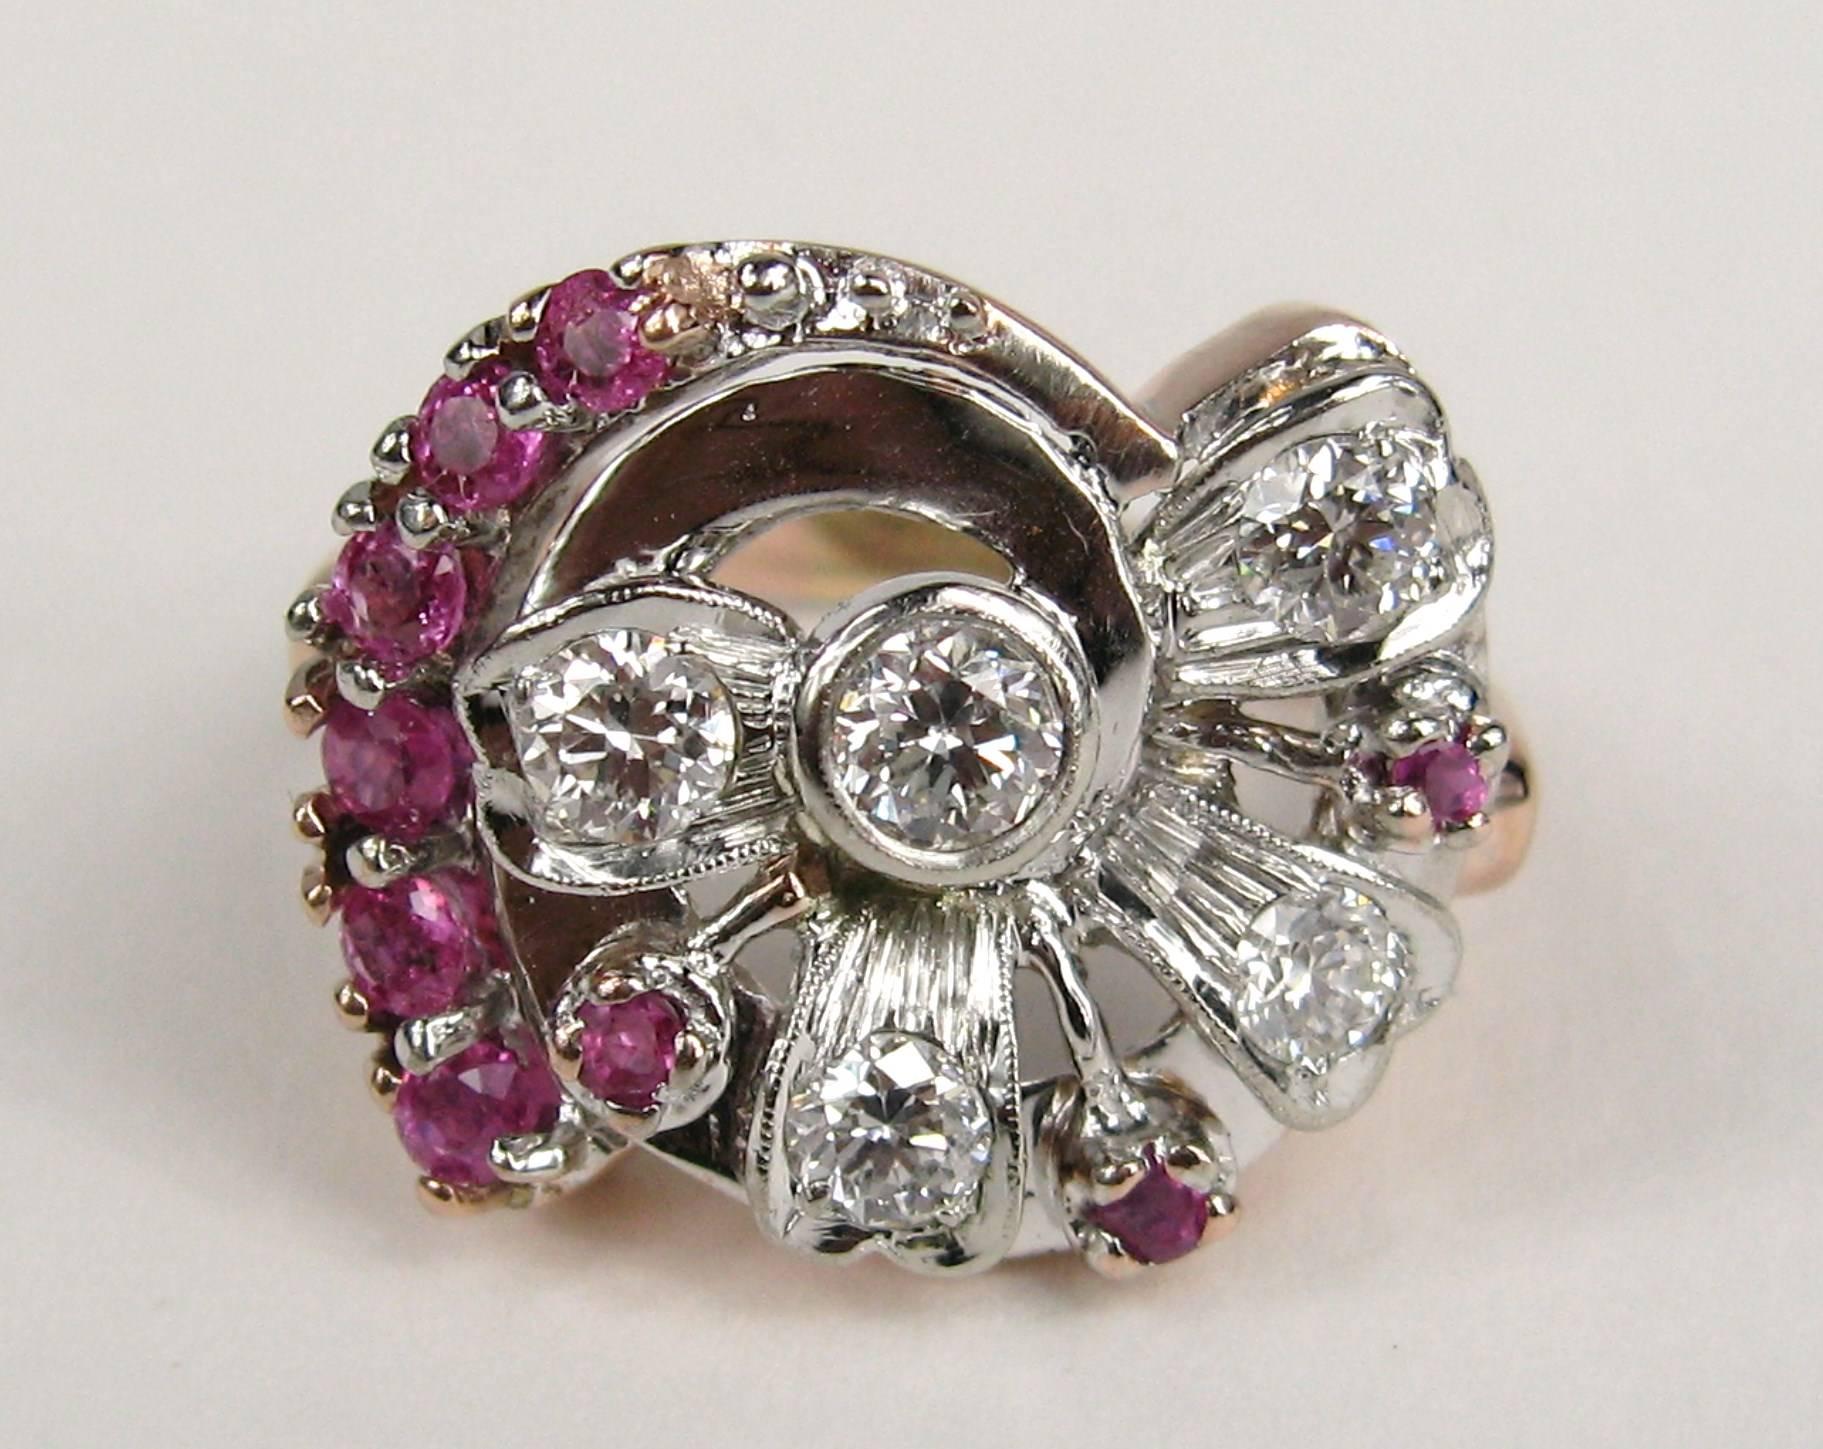 14k Rose and White Gold Ruby and Diamond Cocktail Ring. Center round brilliant bezel set diamond approximately .30 carats, surrounded my 4 smaller round brilliant cut diamonds approximately .72 carats, G/H color SI clarity and 9 prong set rubies